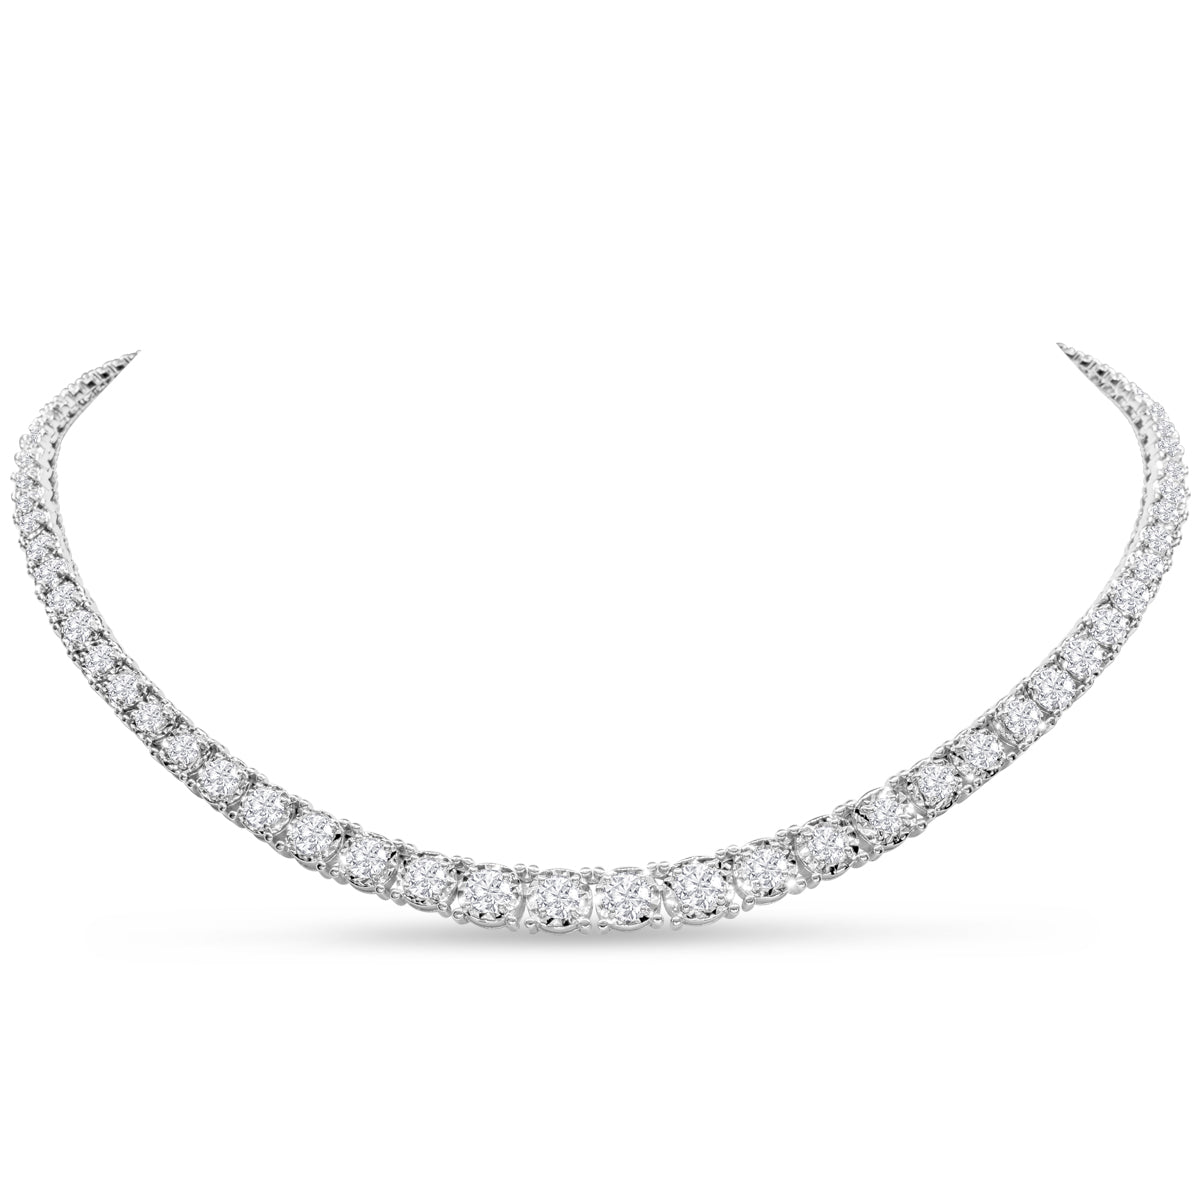 Sselects 7 Carat Lab Grown Diamond Miracle Set Tennis Necklace In 14 Karat White In Gold